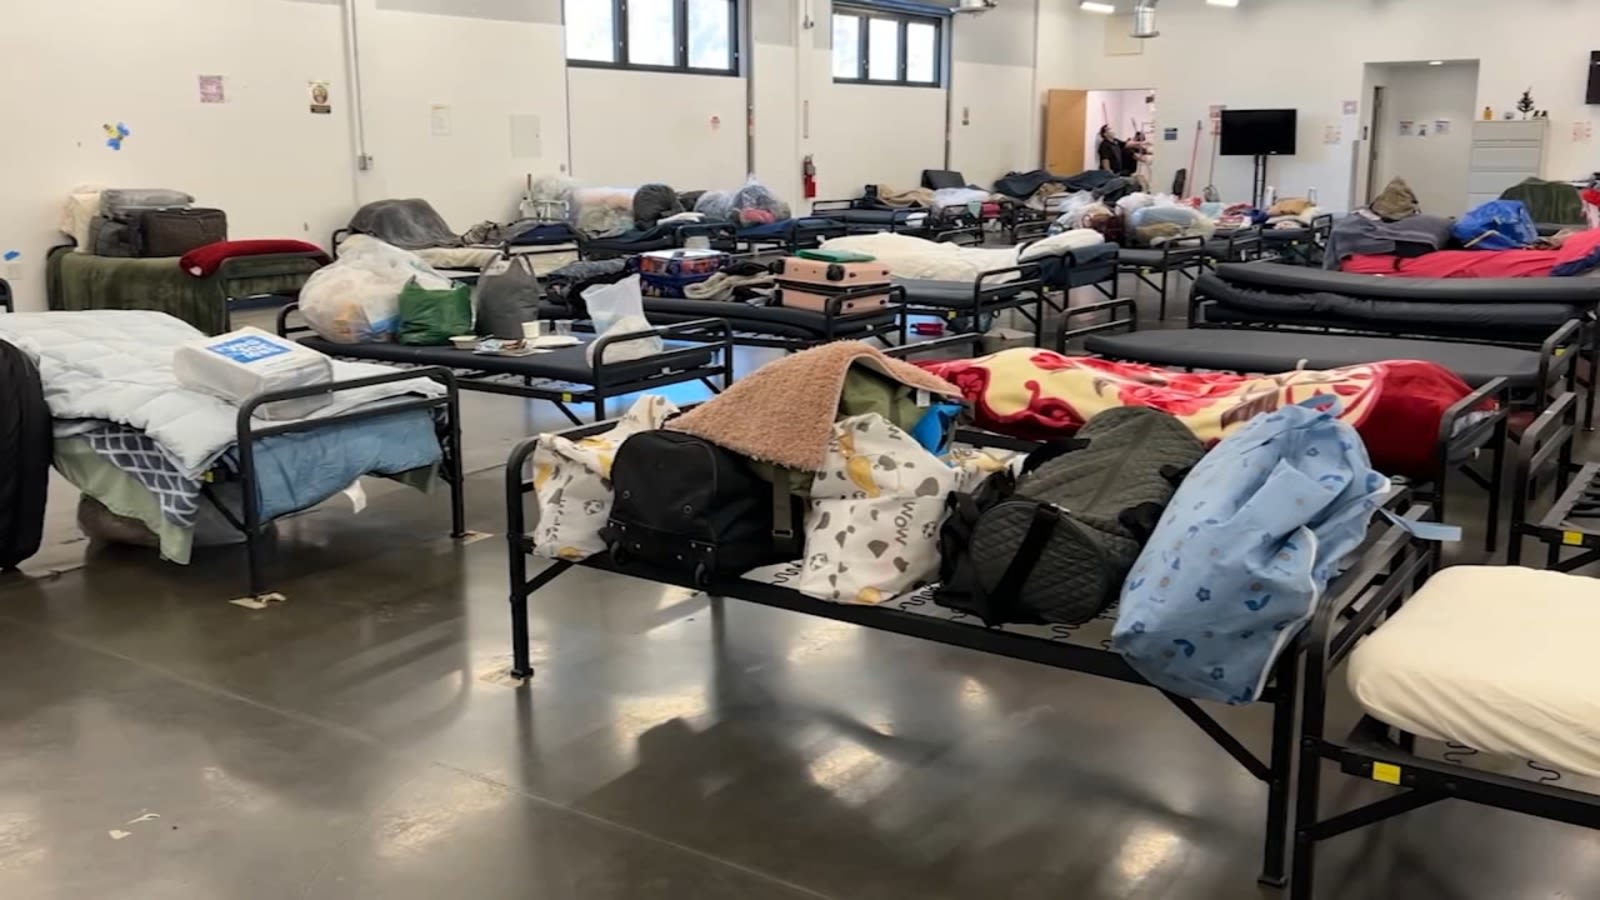 South Bay homeless shelter addresses reports of scabies outbreak